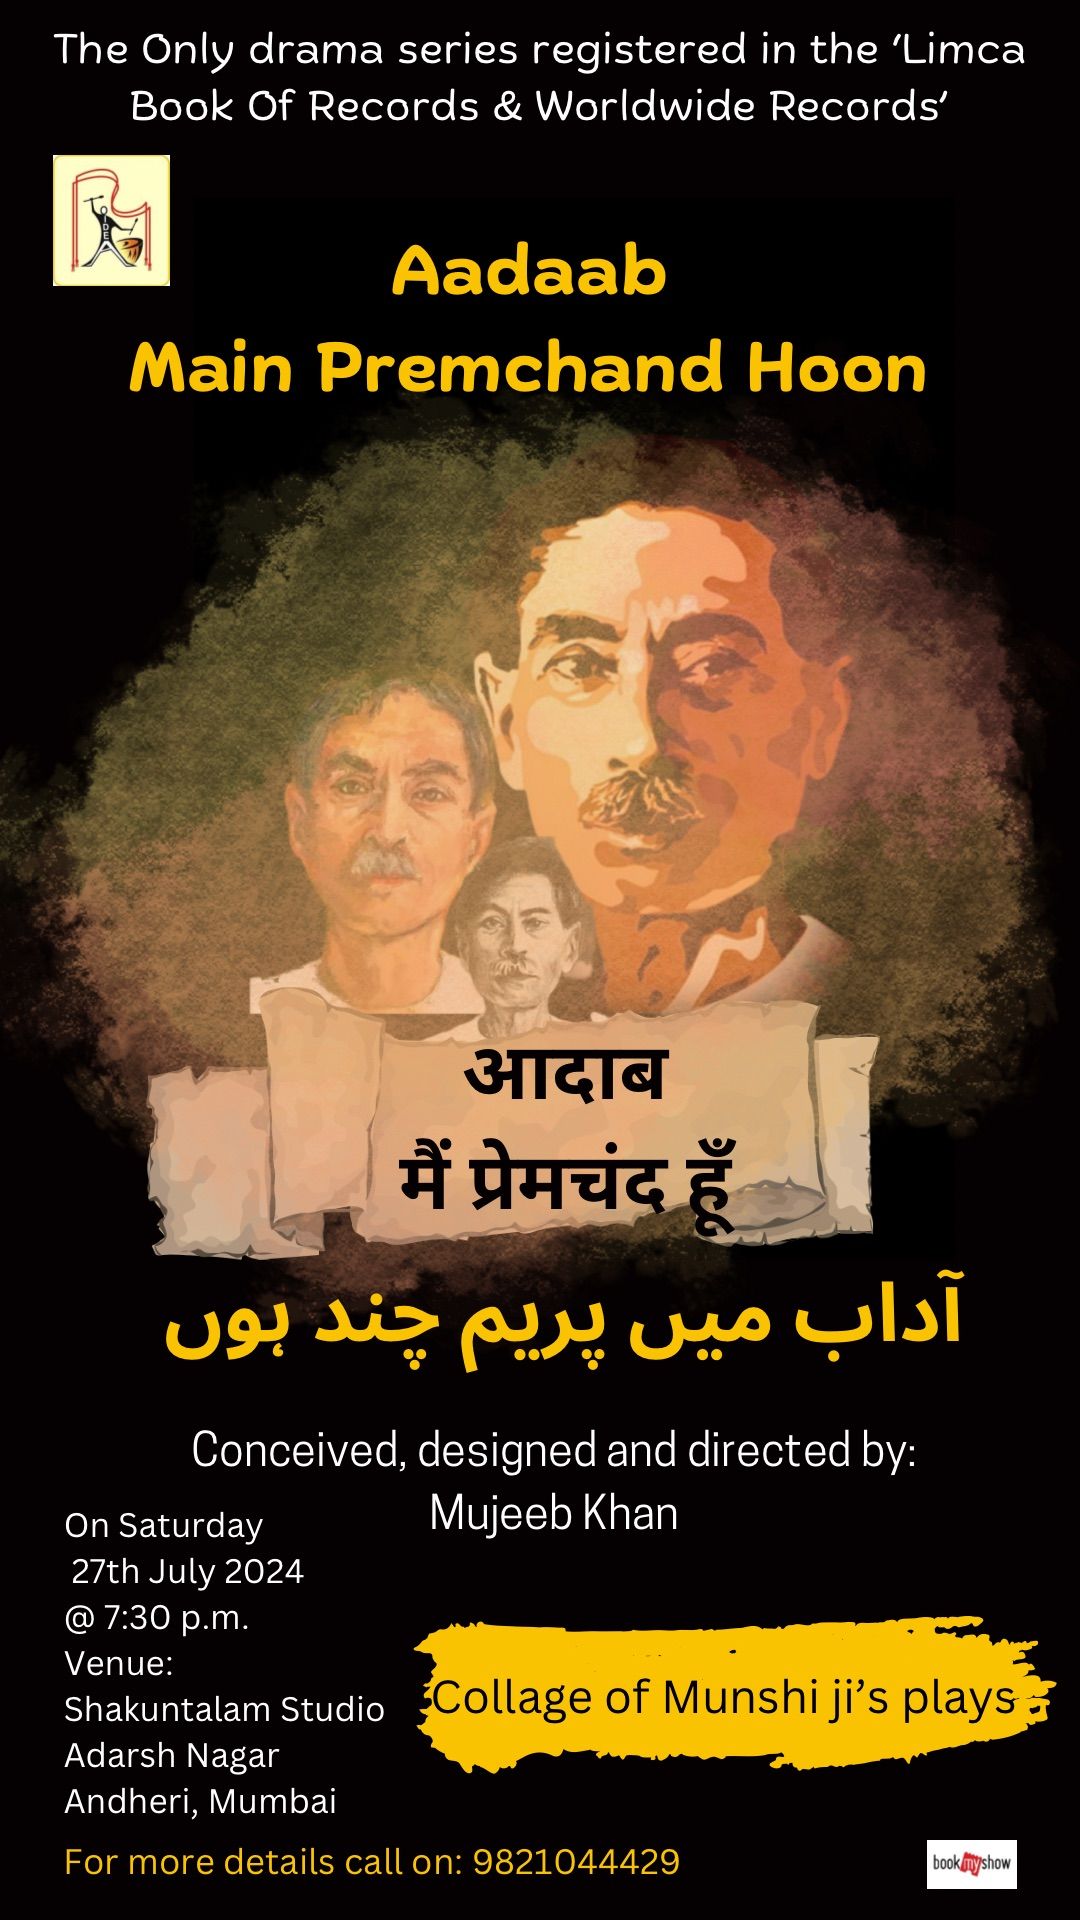 Aadaab Main Premchand Hoon ( Only drama series registered in Limca book and Worldwide Records 